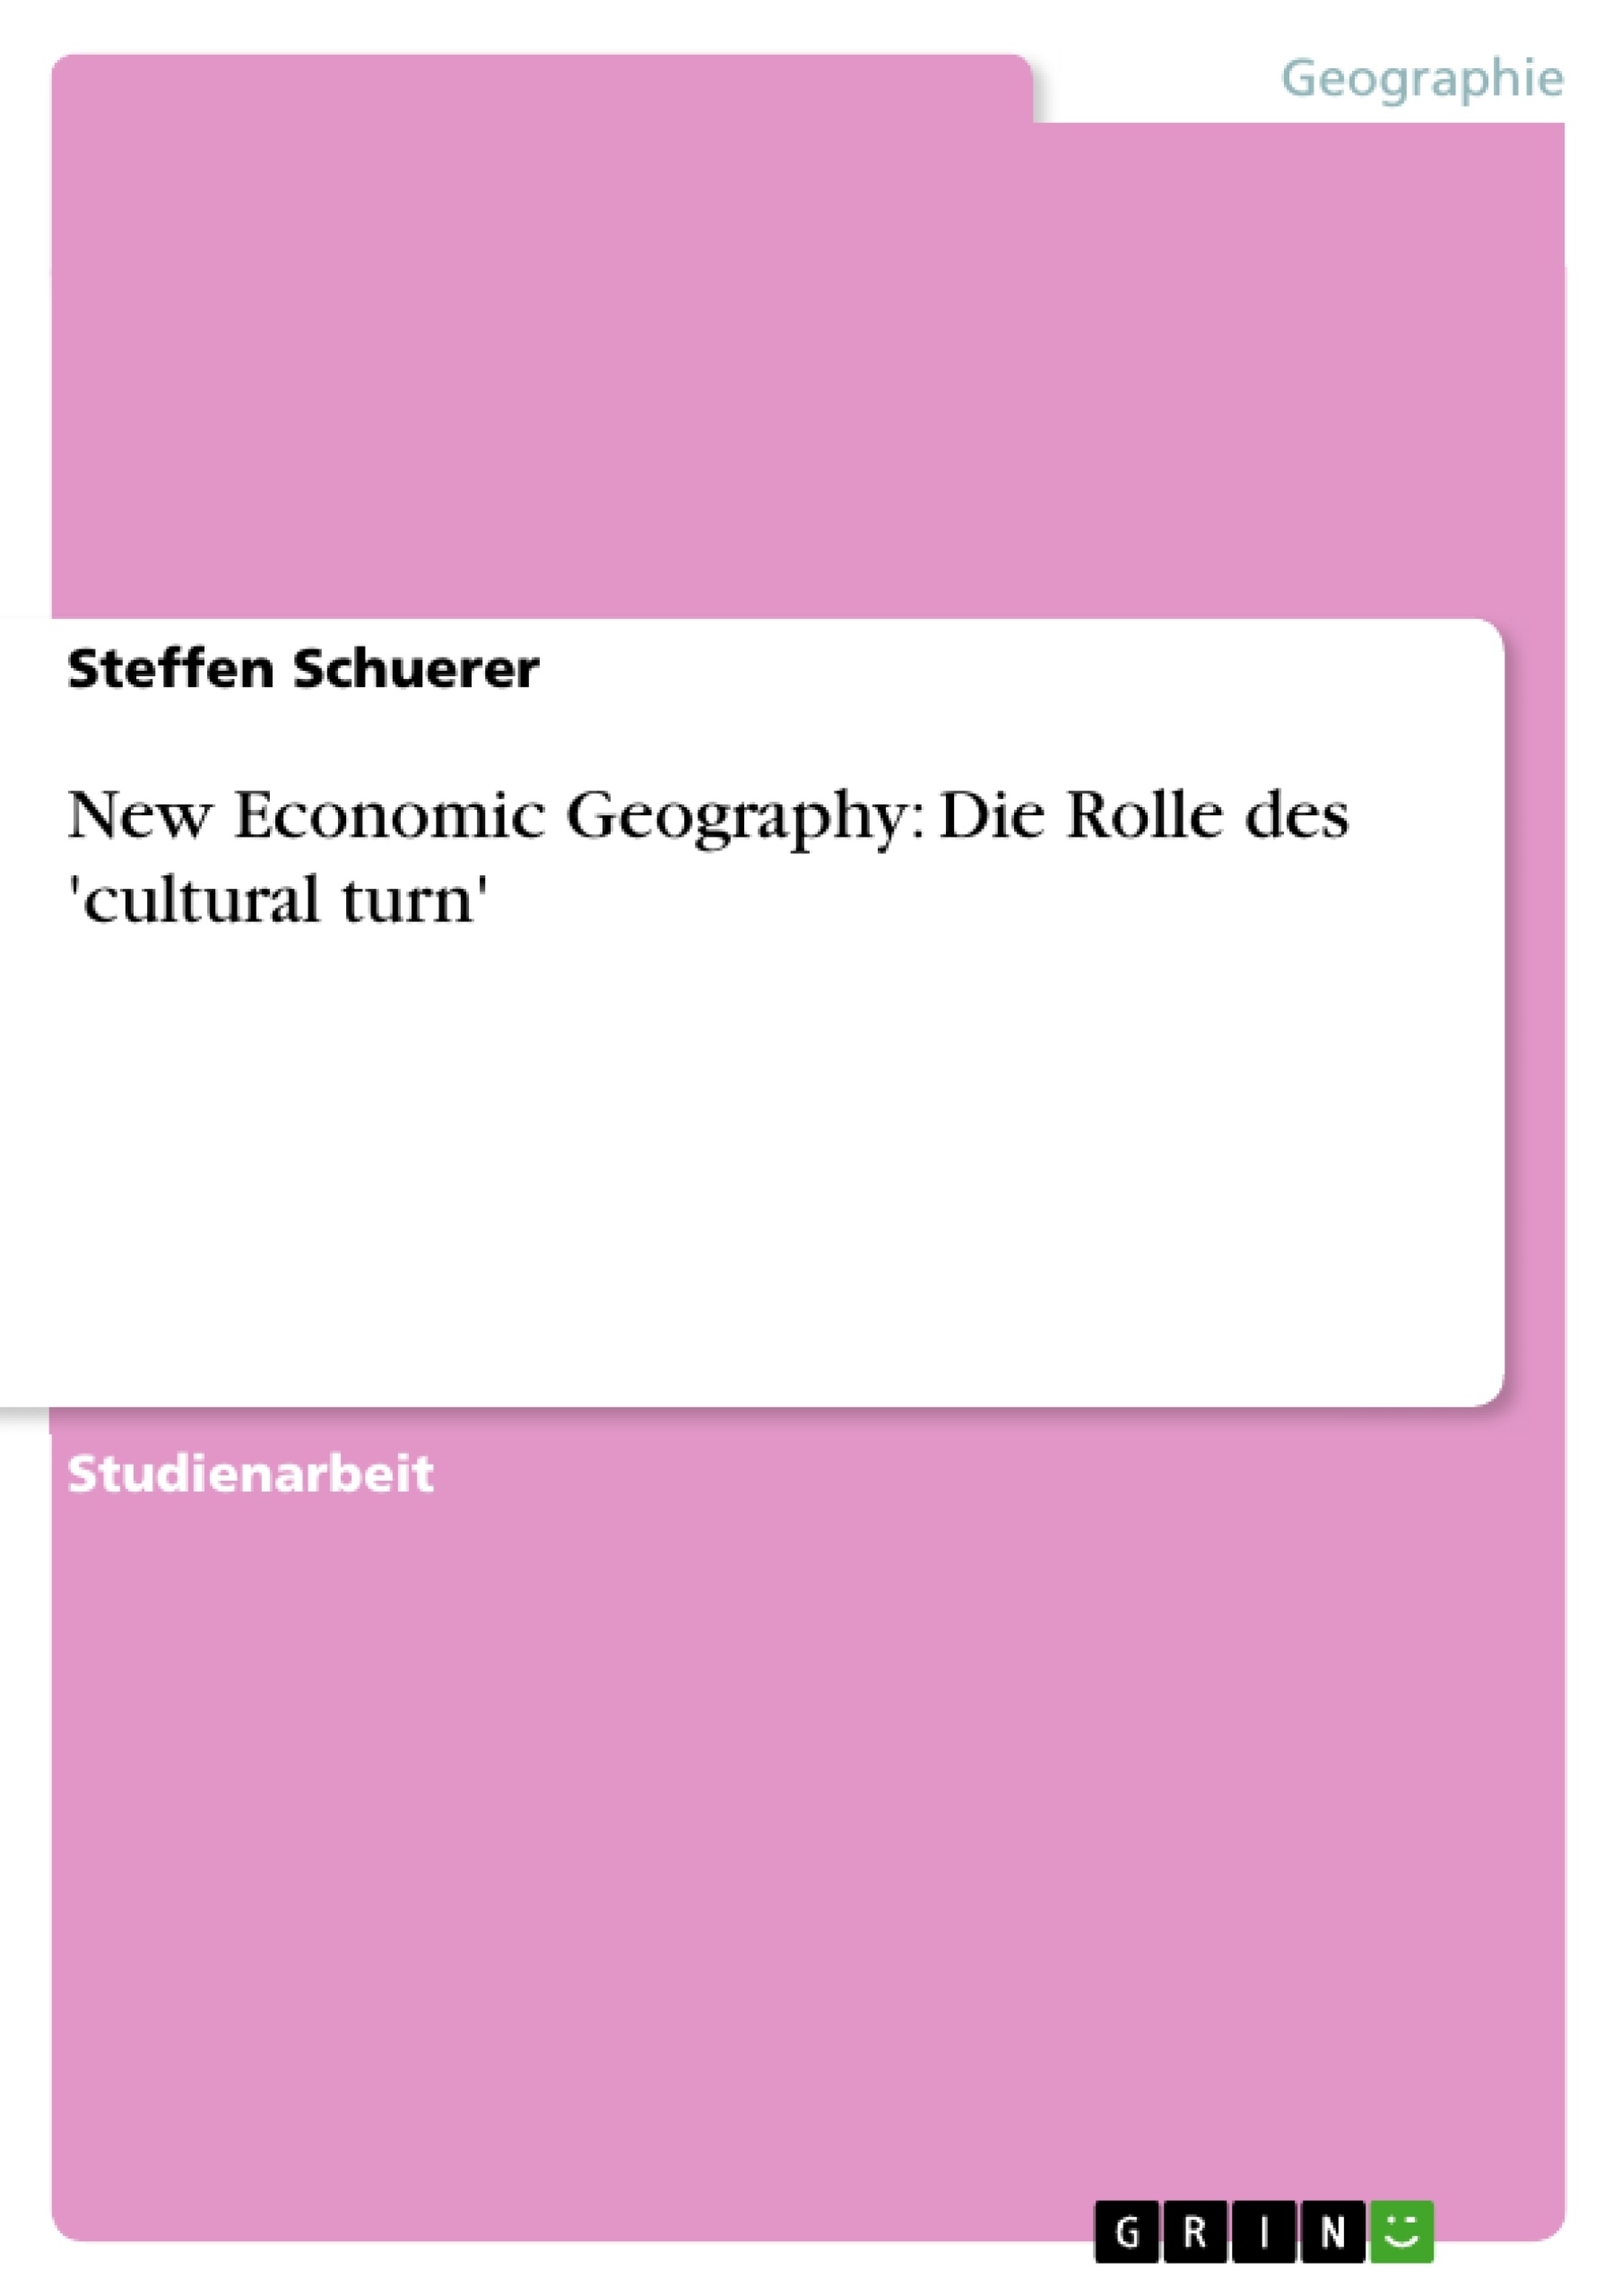 Título: New Economic Geography: Die Rolle des 'cultural turn'